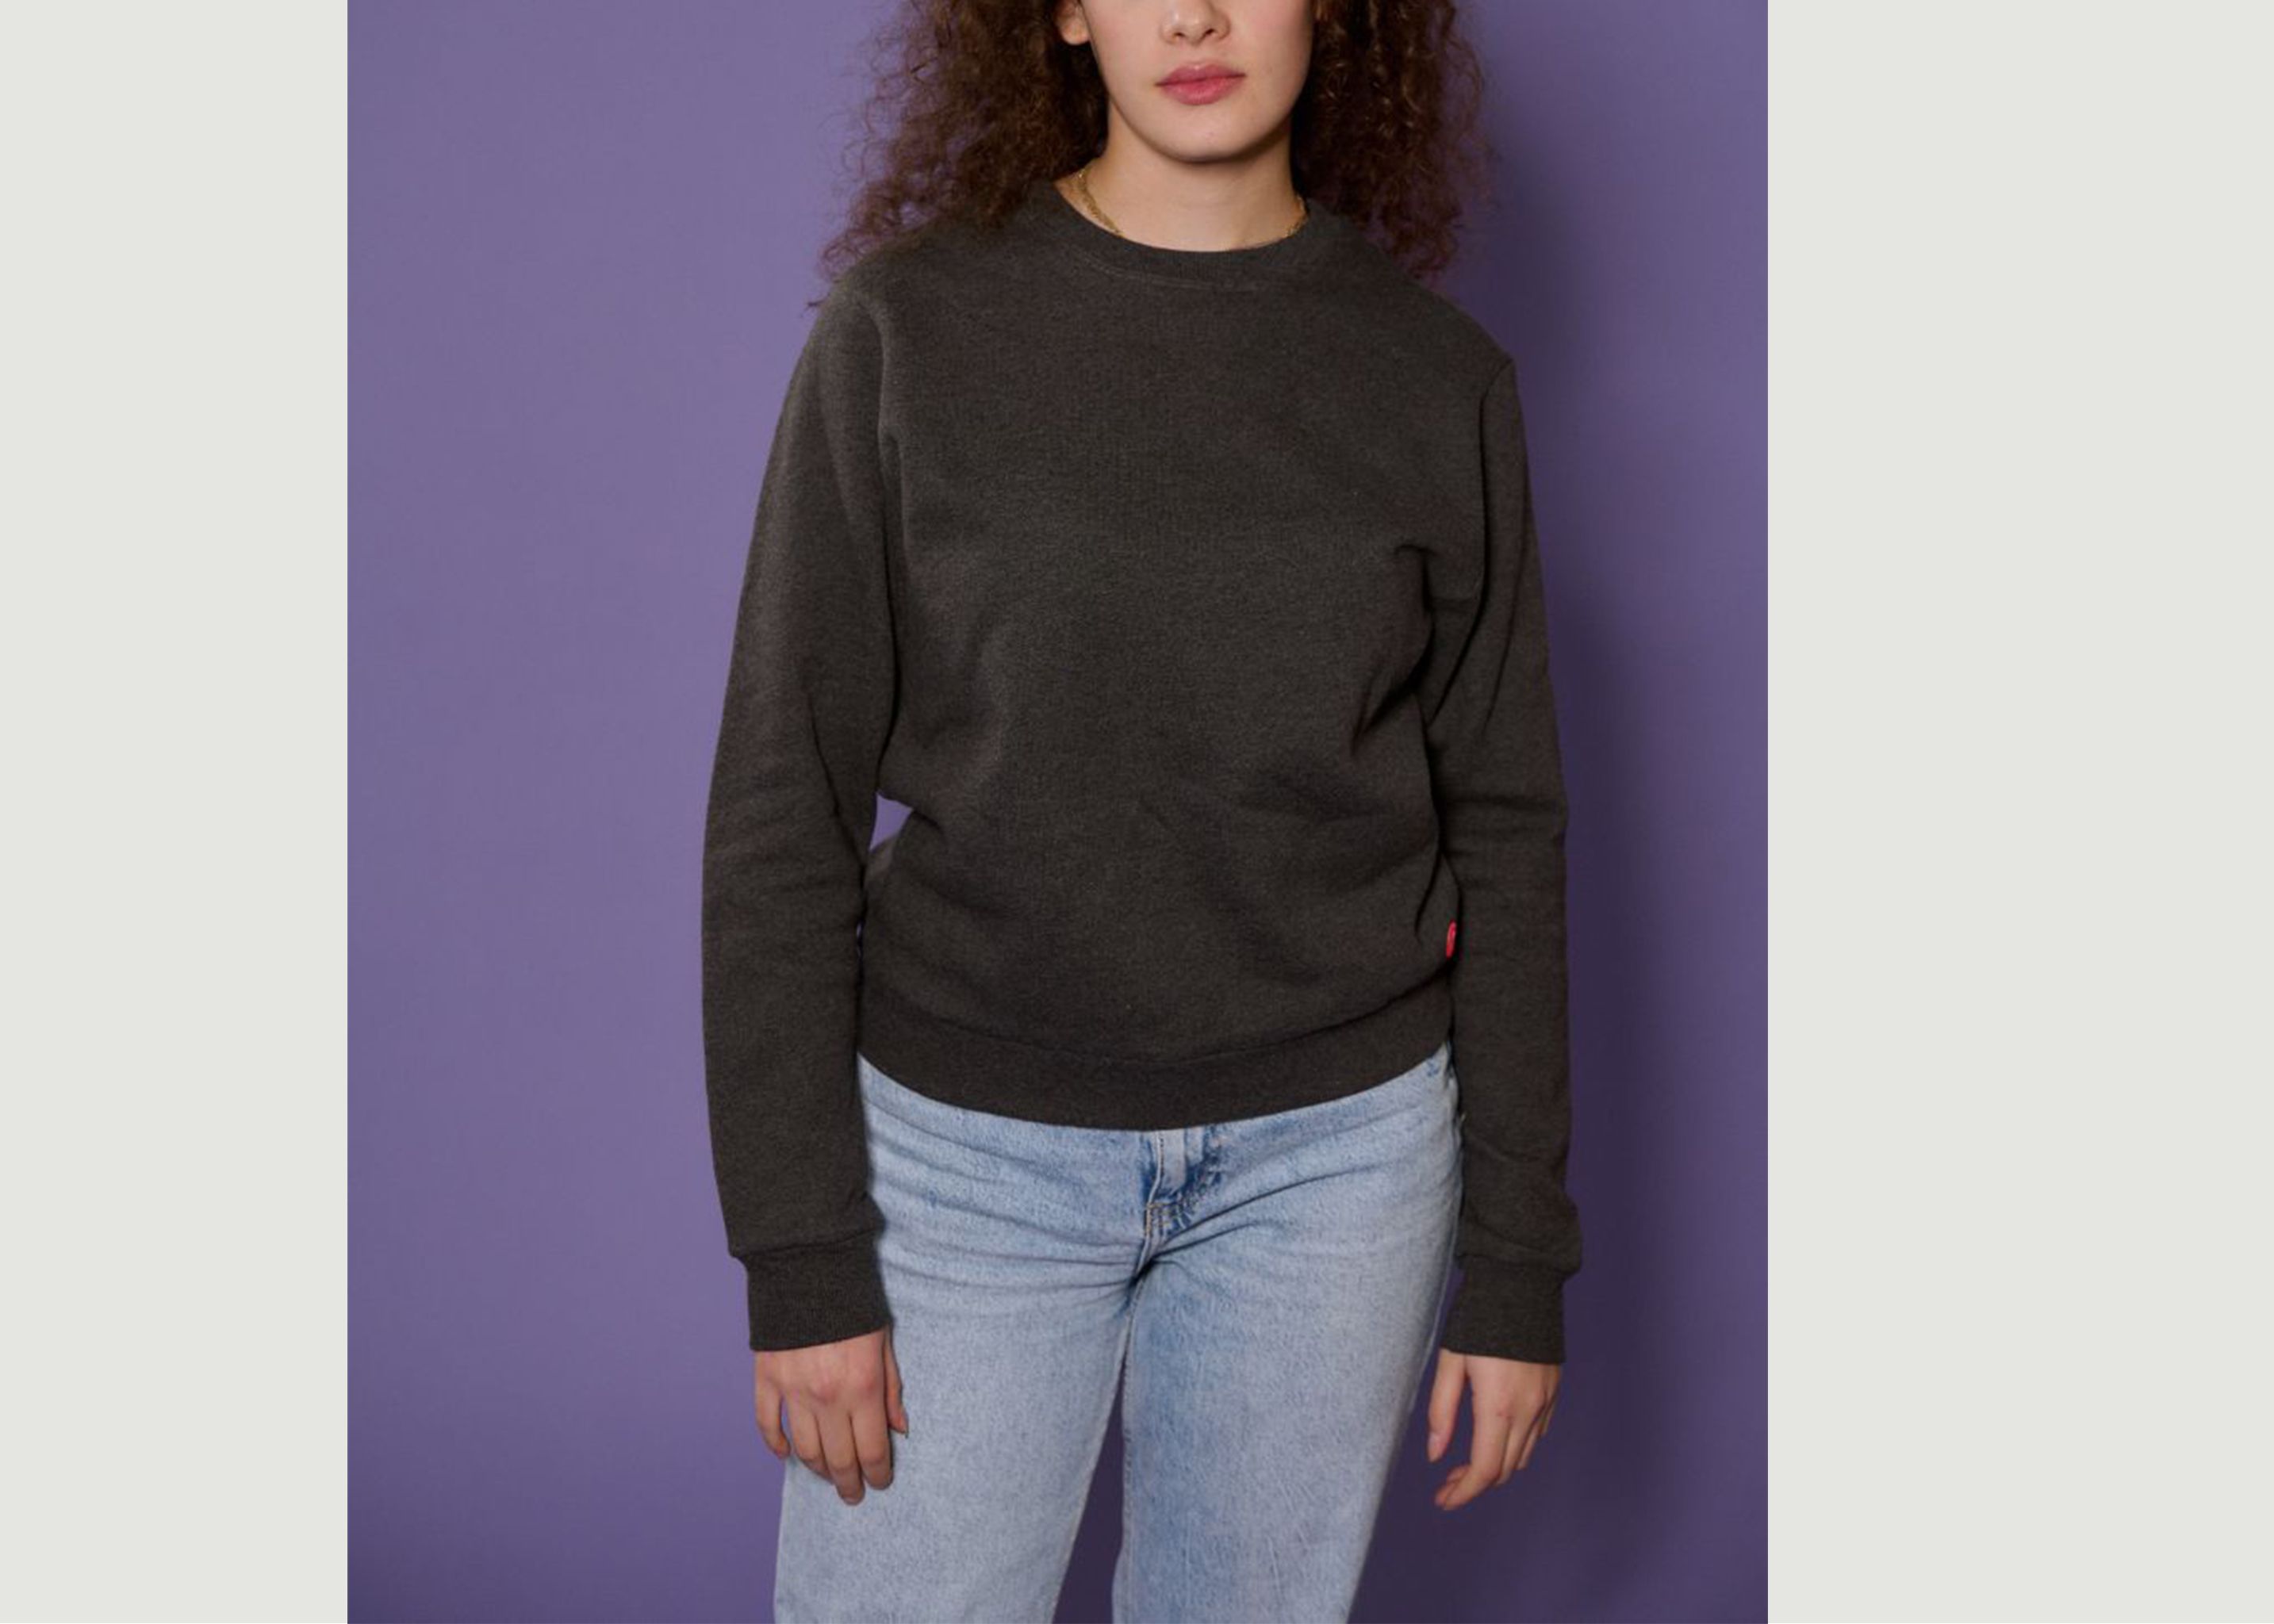 Pullover le basic by Meuf - Meuf